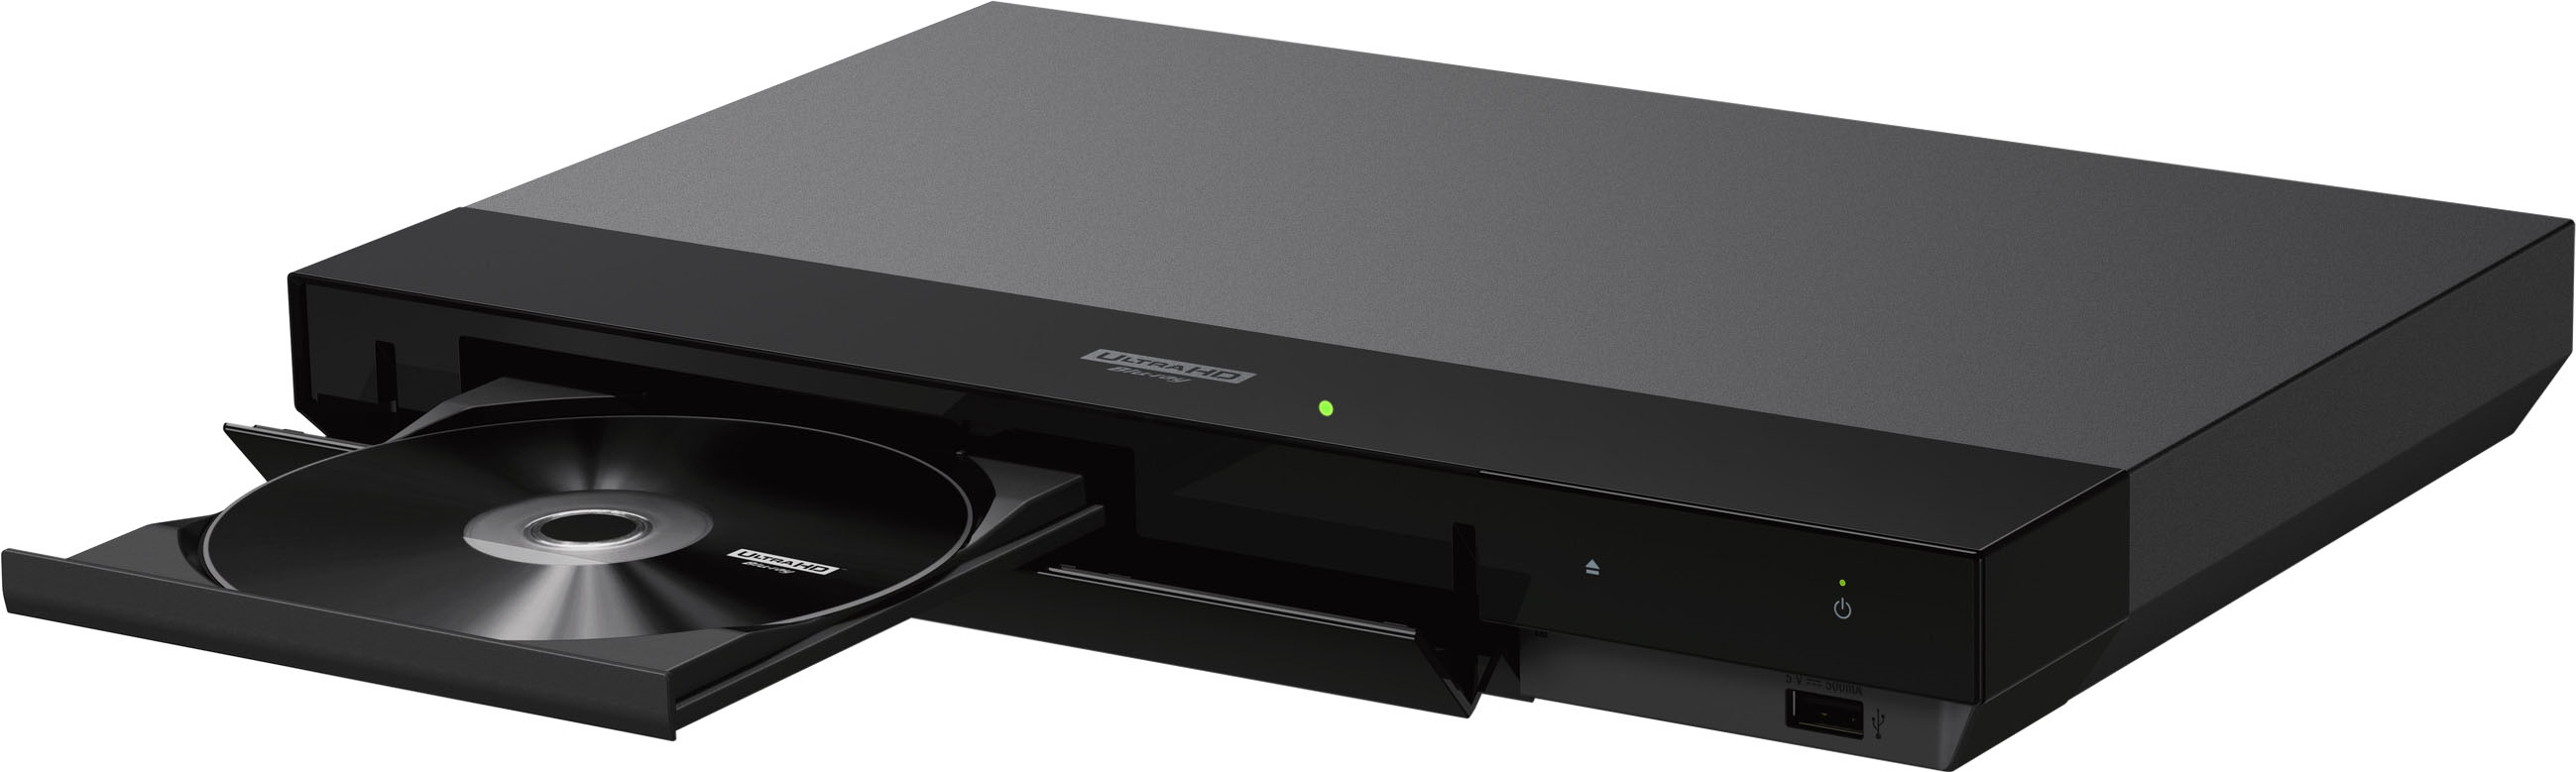 Sony BDP-S6700 Streaming 4K Upscaling Wi-Fi Built-In Blu-ray Player Black  BDP-S6700 - Best Buy